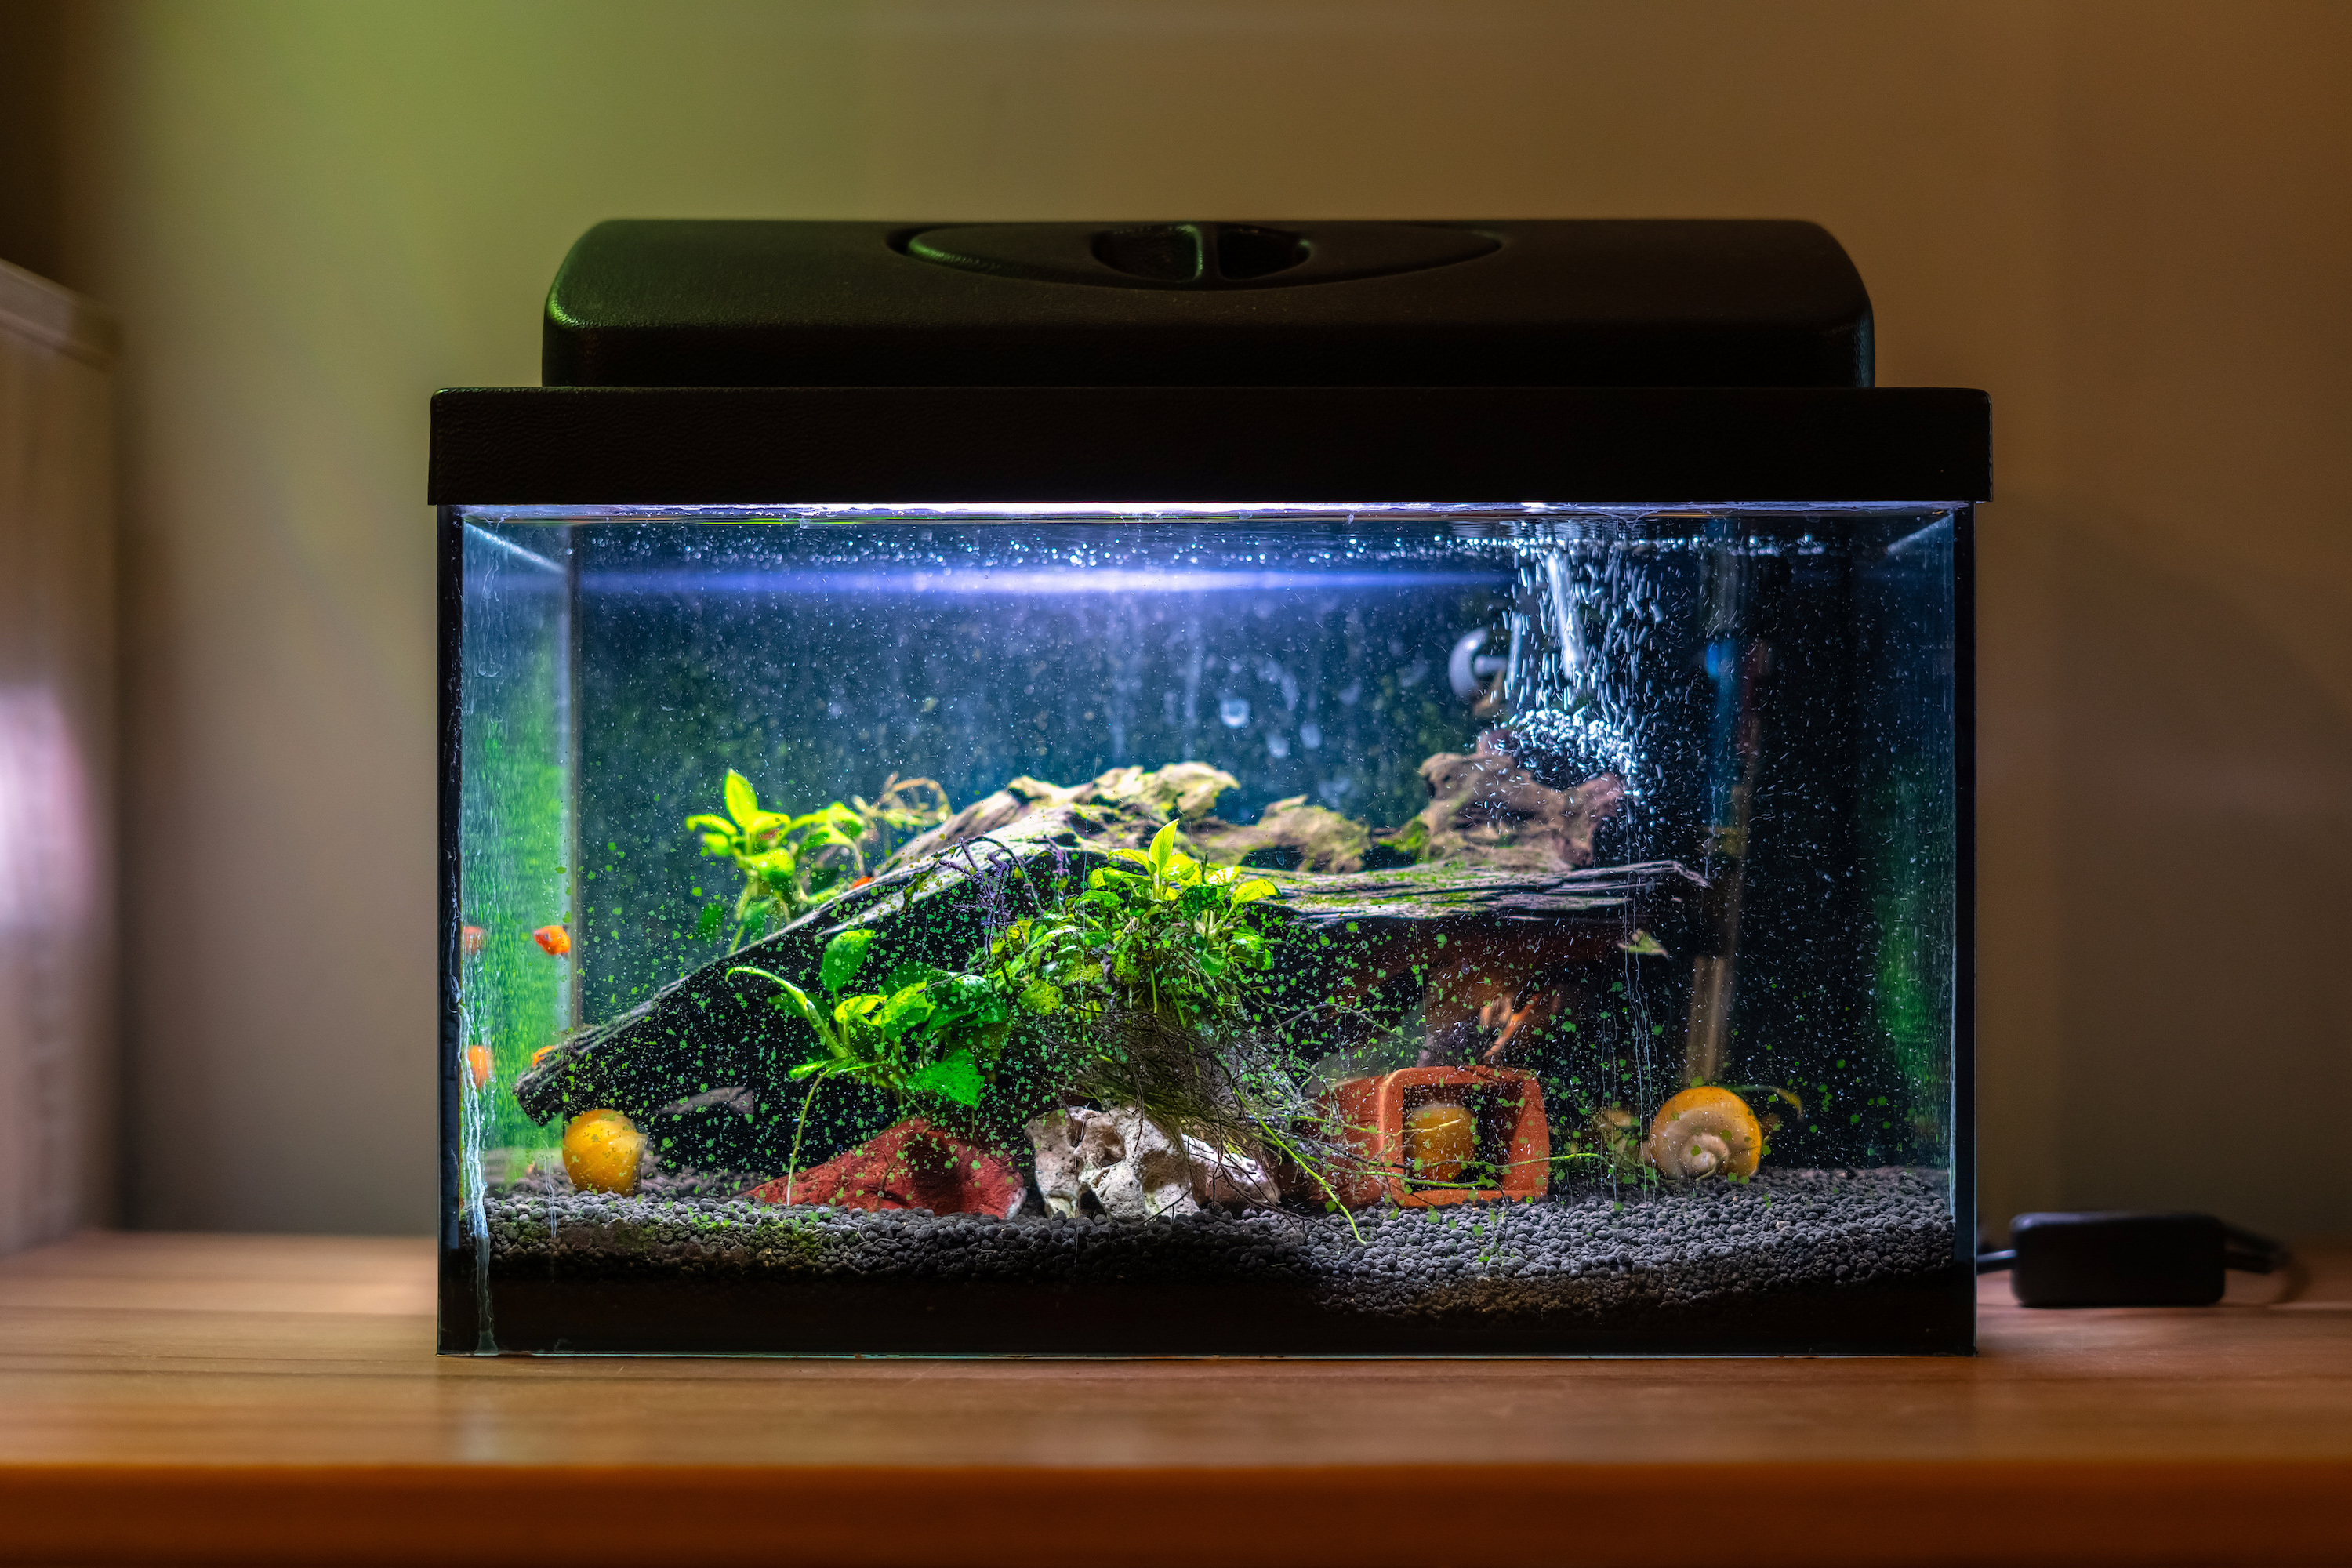 What Do the Bubbles In Your Fish Tank Mean?